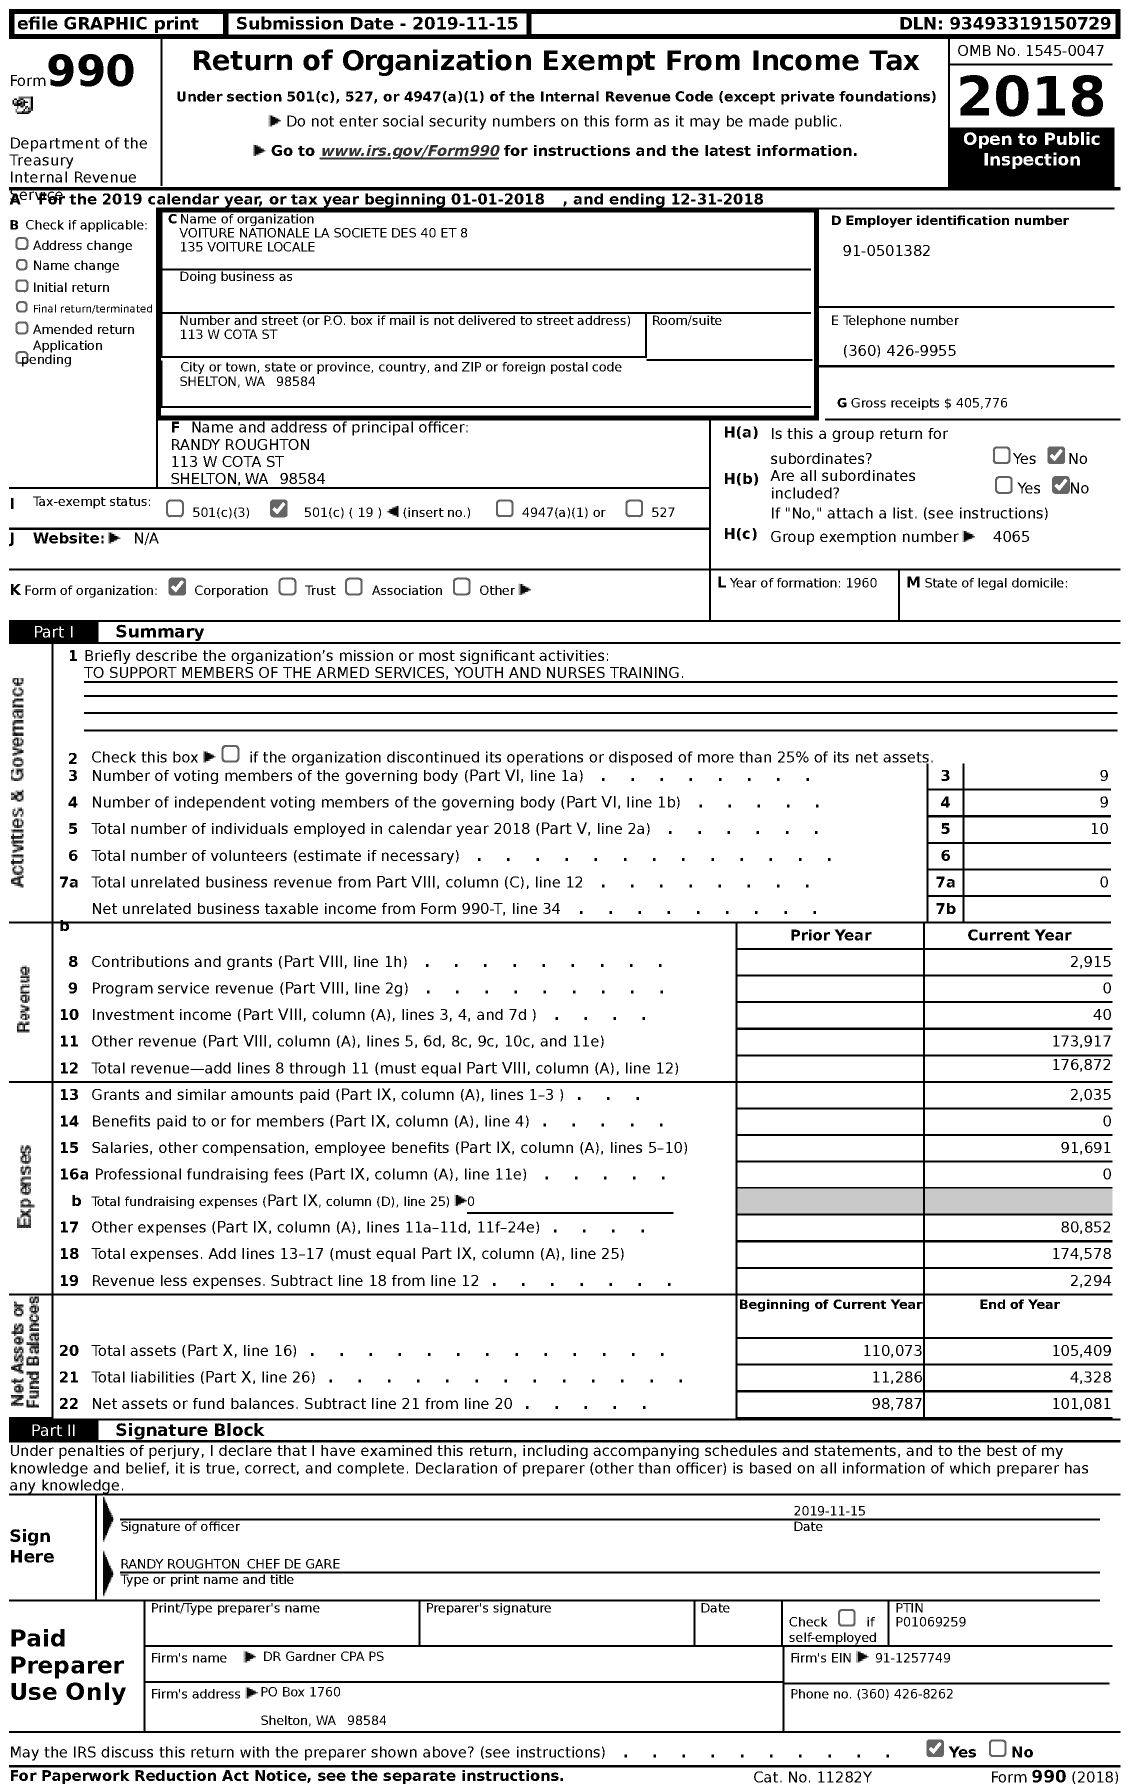 Image of first page of 2018 Form 990 for The Forty and Eight - 135 Voiture Locale